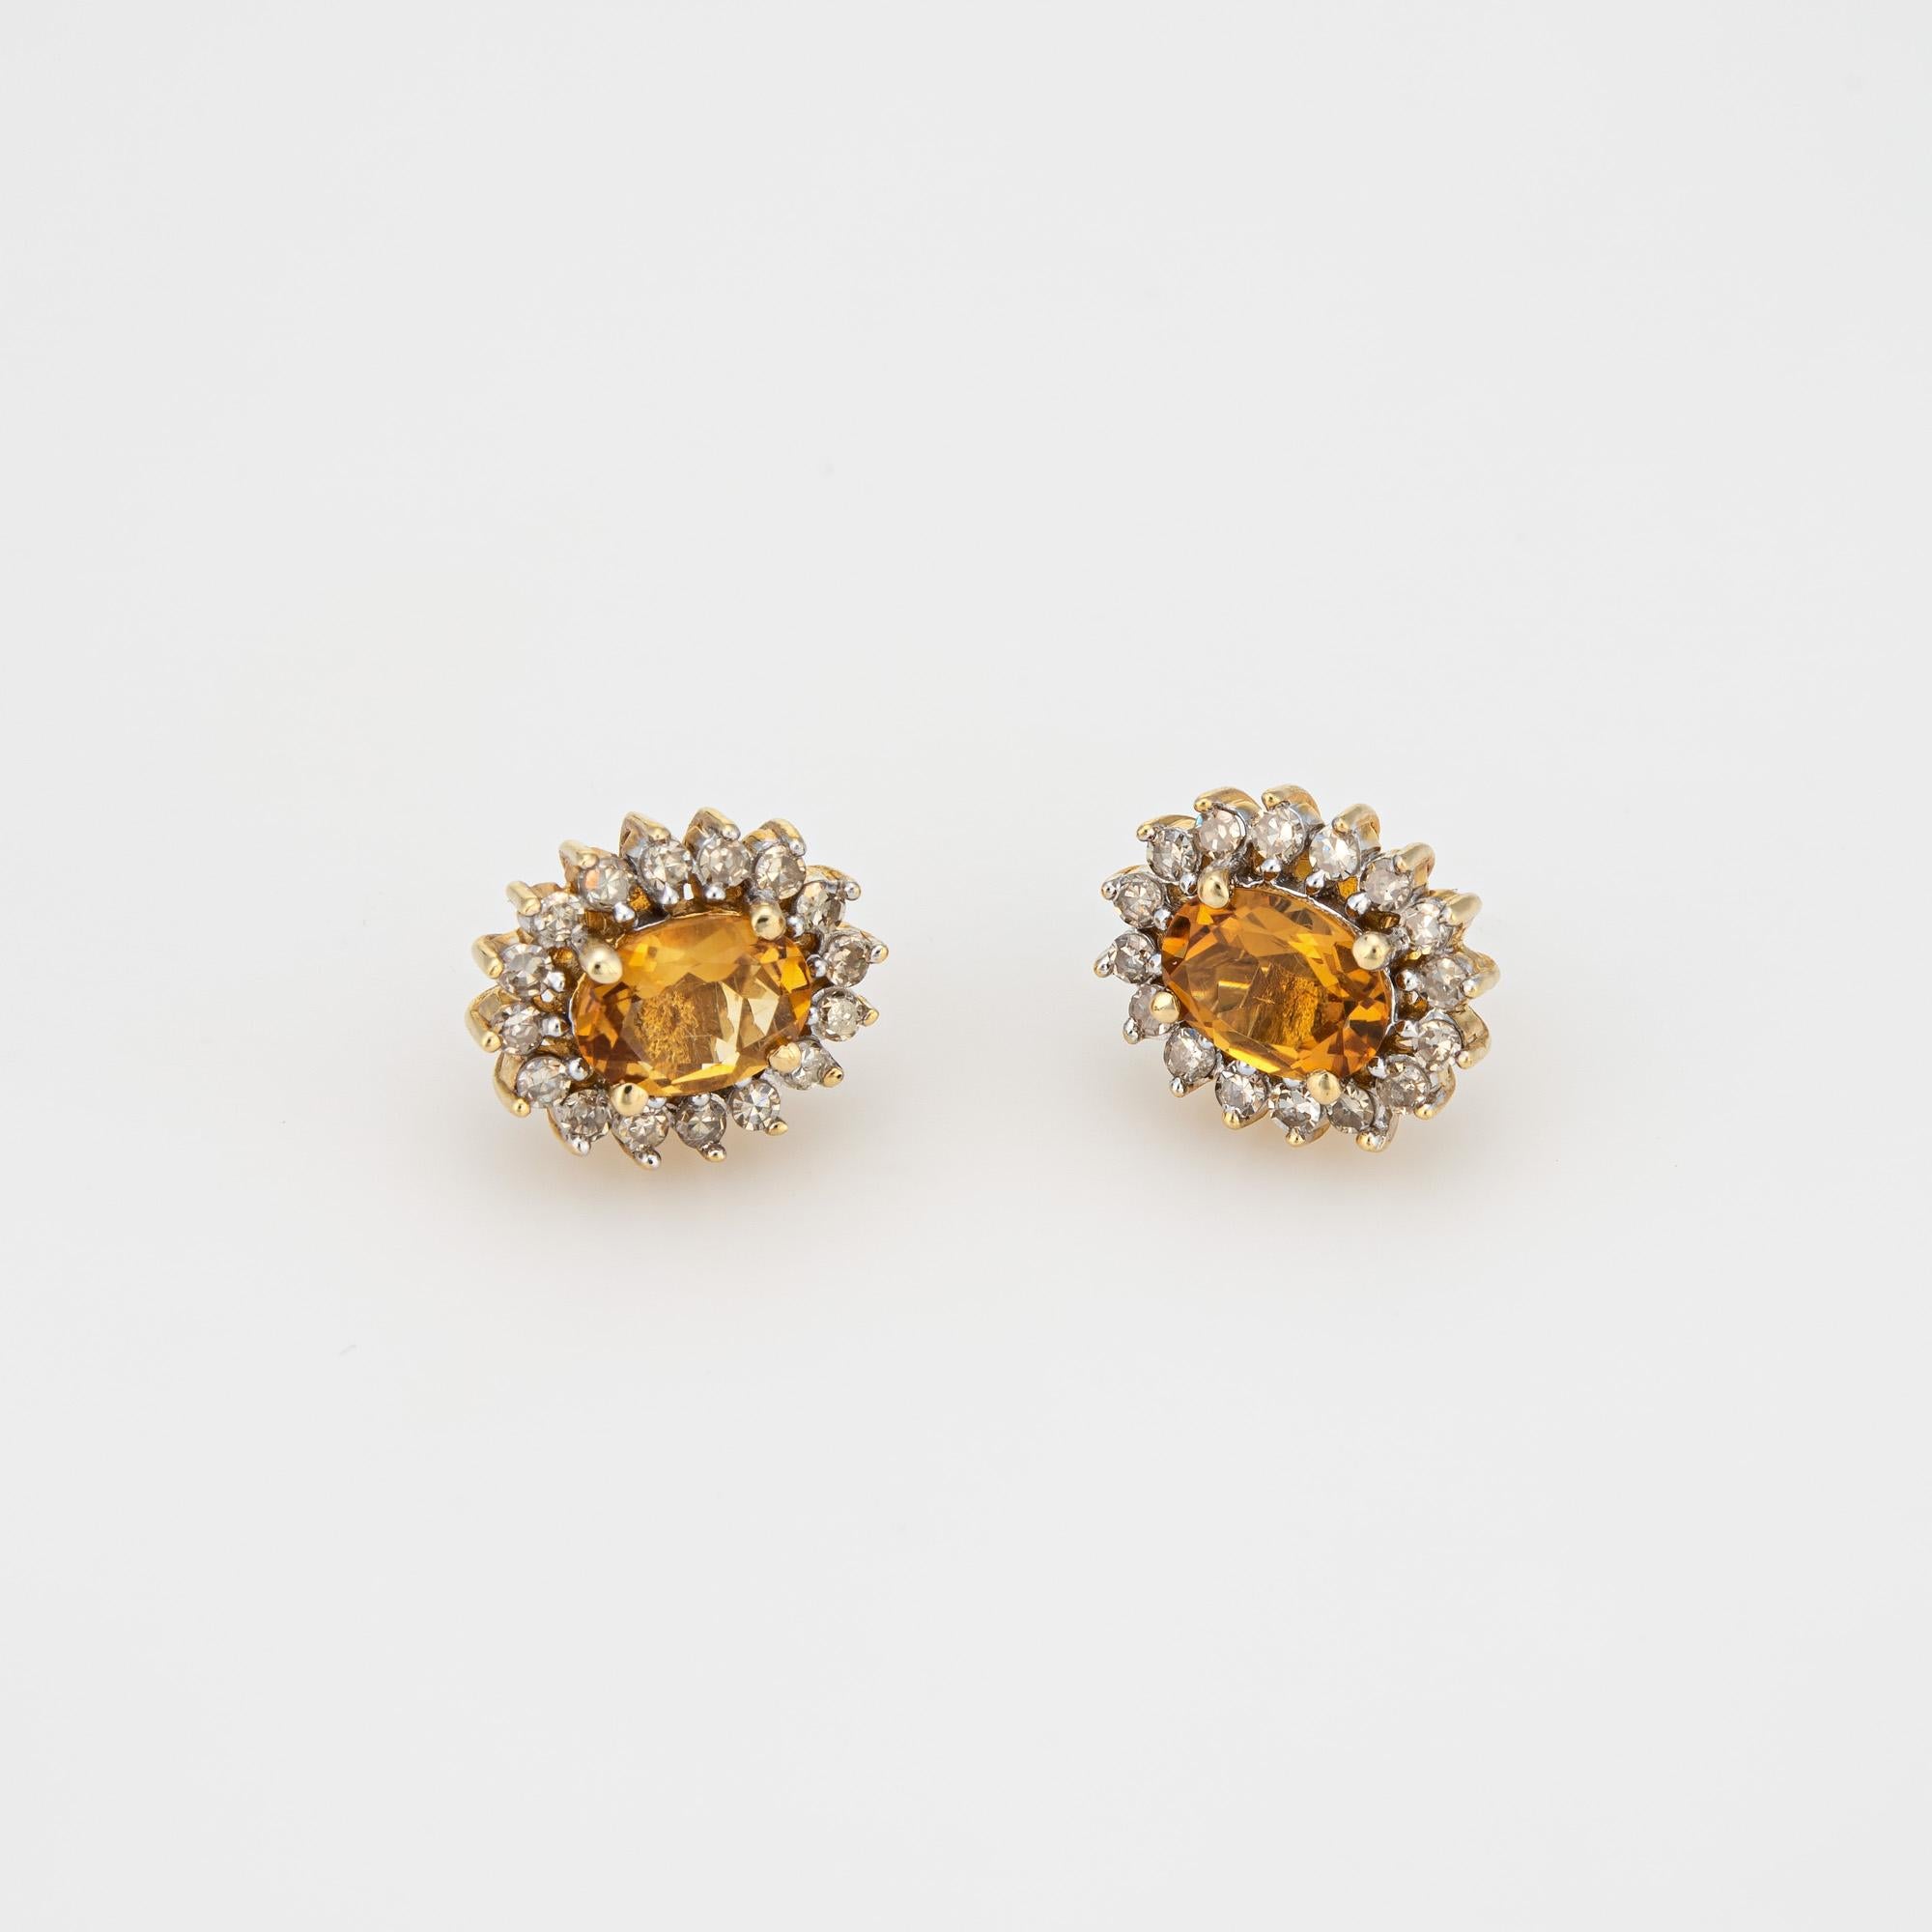 Finely detailed pair of citrine and diamond stud earrings crafted in 14k yellow gold. 

Oval faceted citrines measure 7mm x 5mm, accented with an estimated 0.25 carats of diamonds (estimated at I-J color and SI2-I2 clarity). 
The sweet earrings are